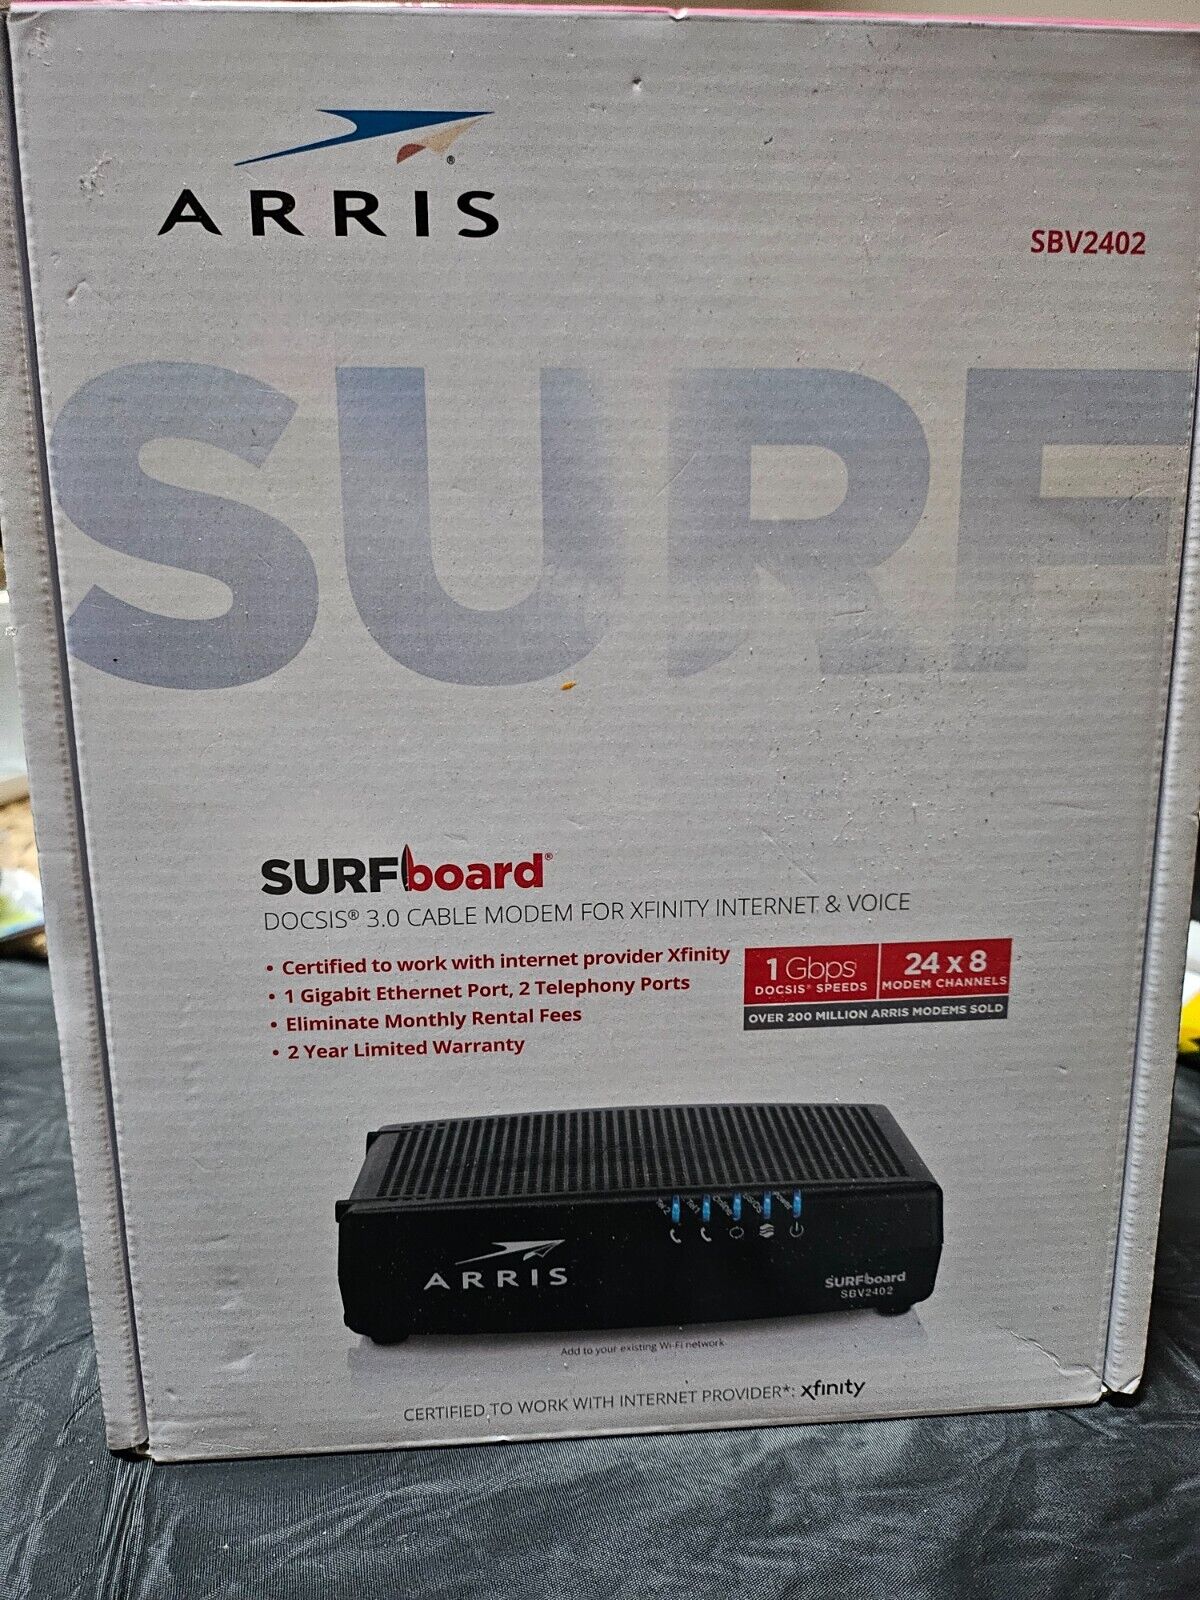 ARRIS SURFboard SBV2402 DOCSIS 3.0 Cable Modem Comcast Xfinity 1 Gbps Port NEW